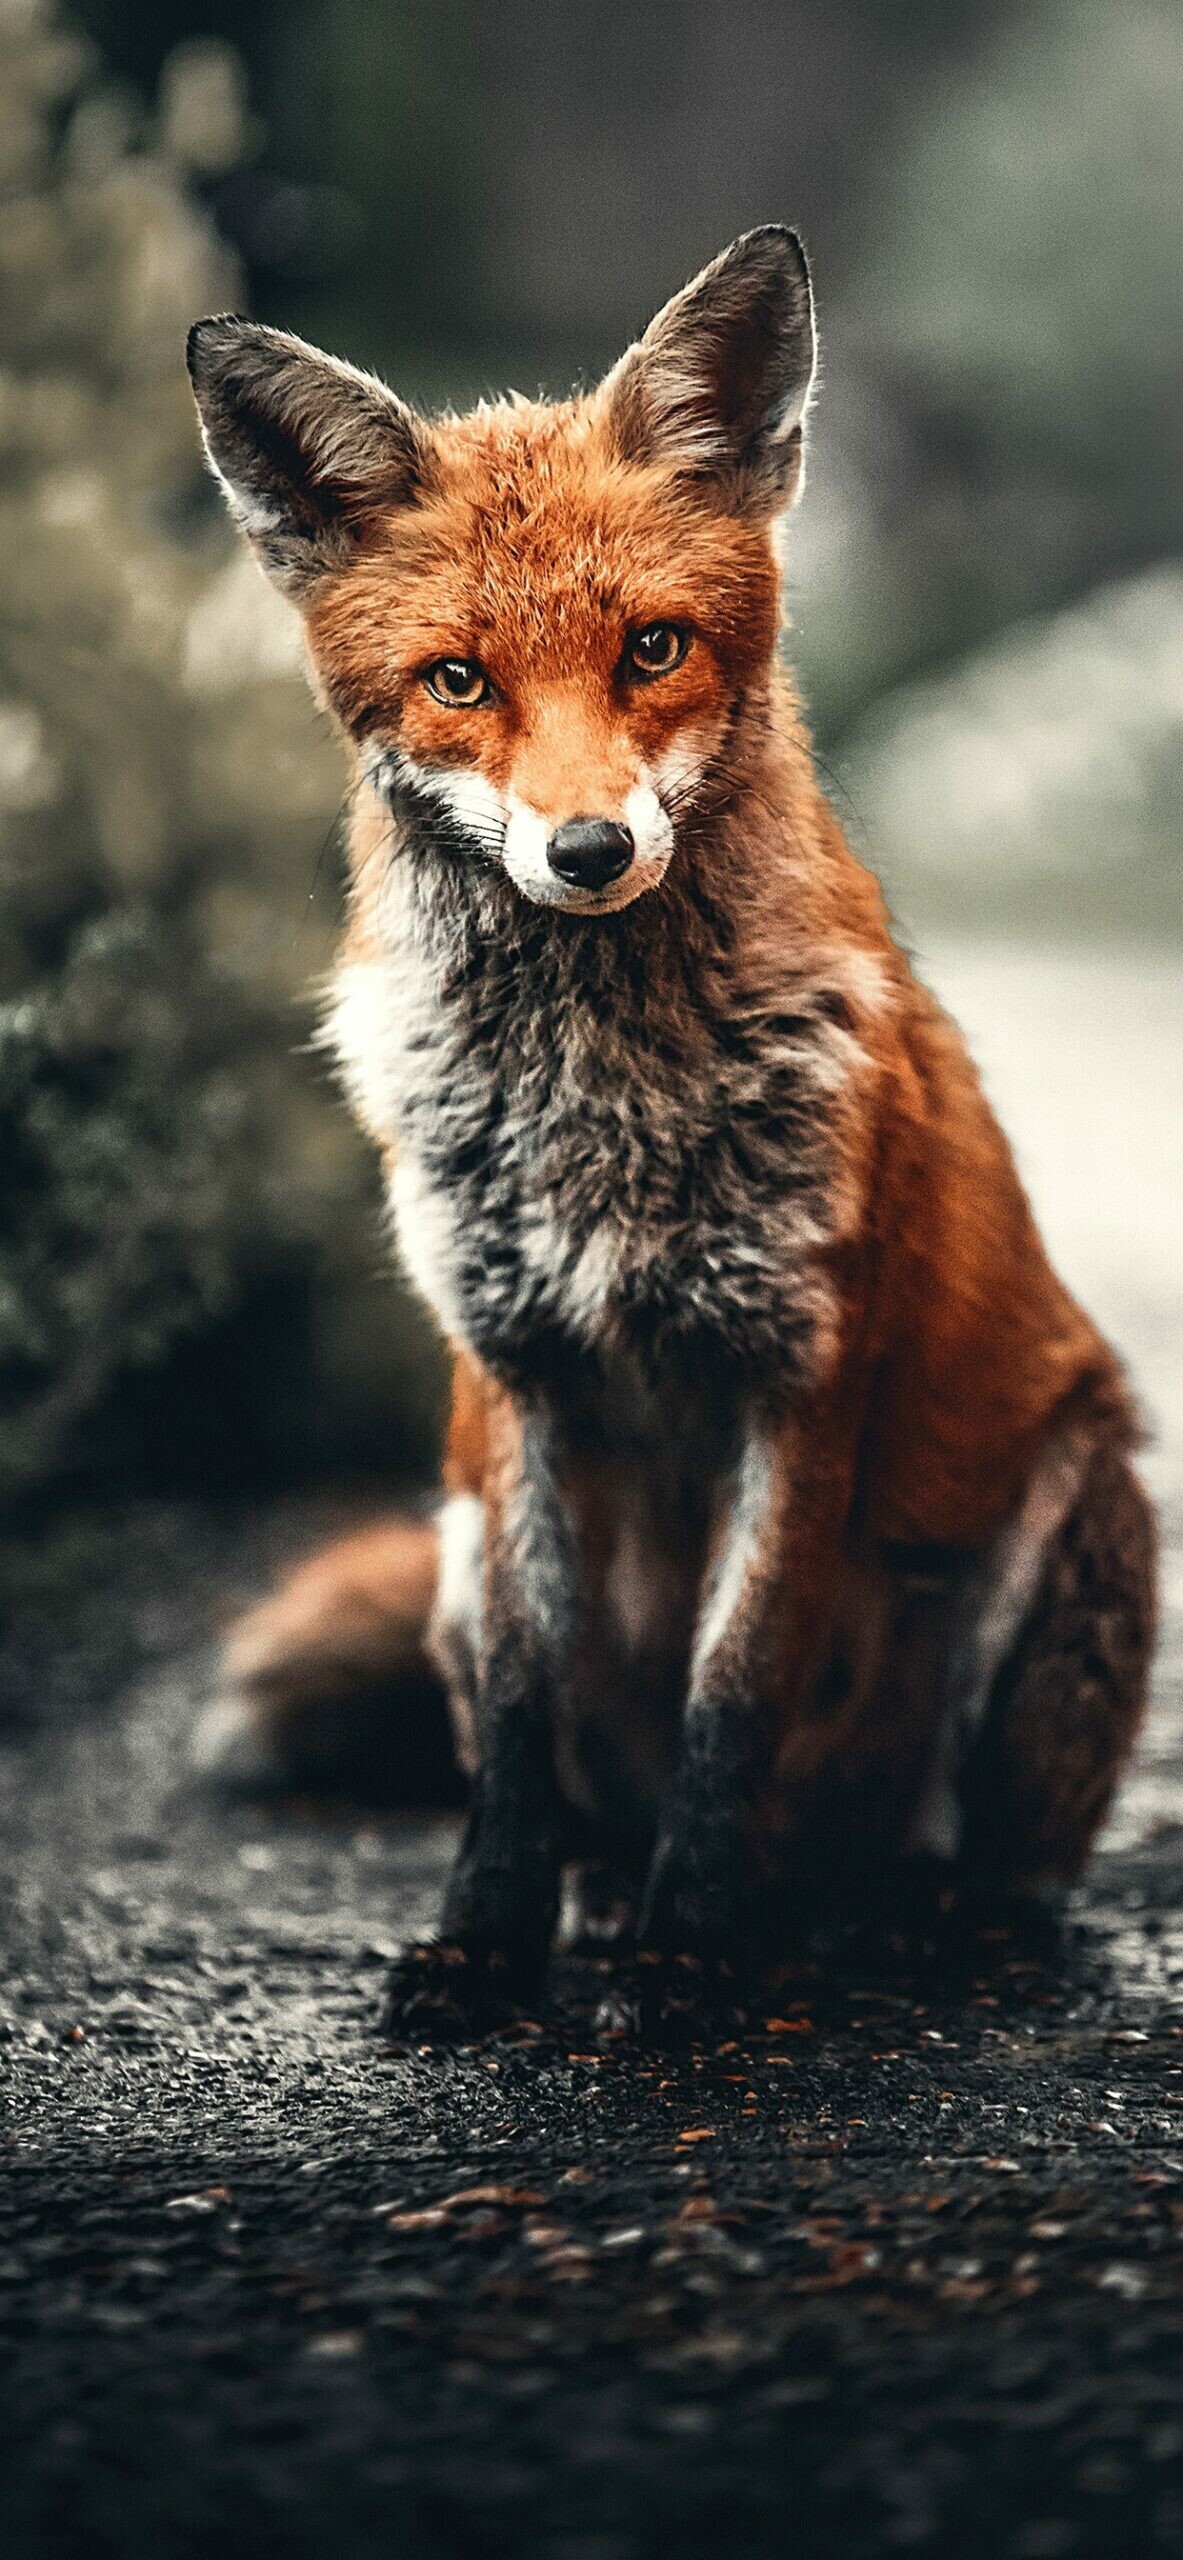 Fox: Members of the dog family, resembling small to medium-sized bushy-tailed dogs. 1190x2560 HD Wallpaper.